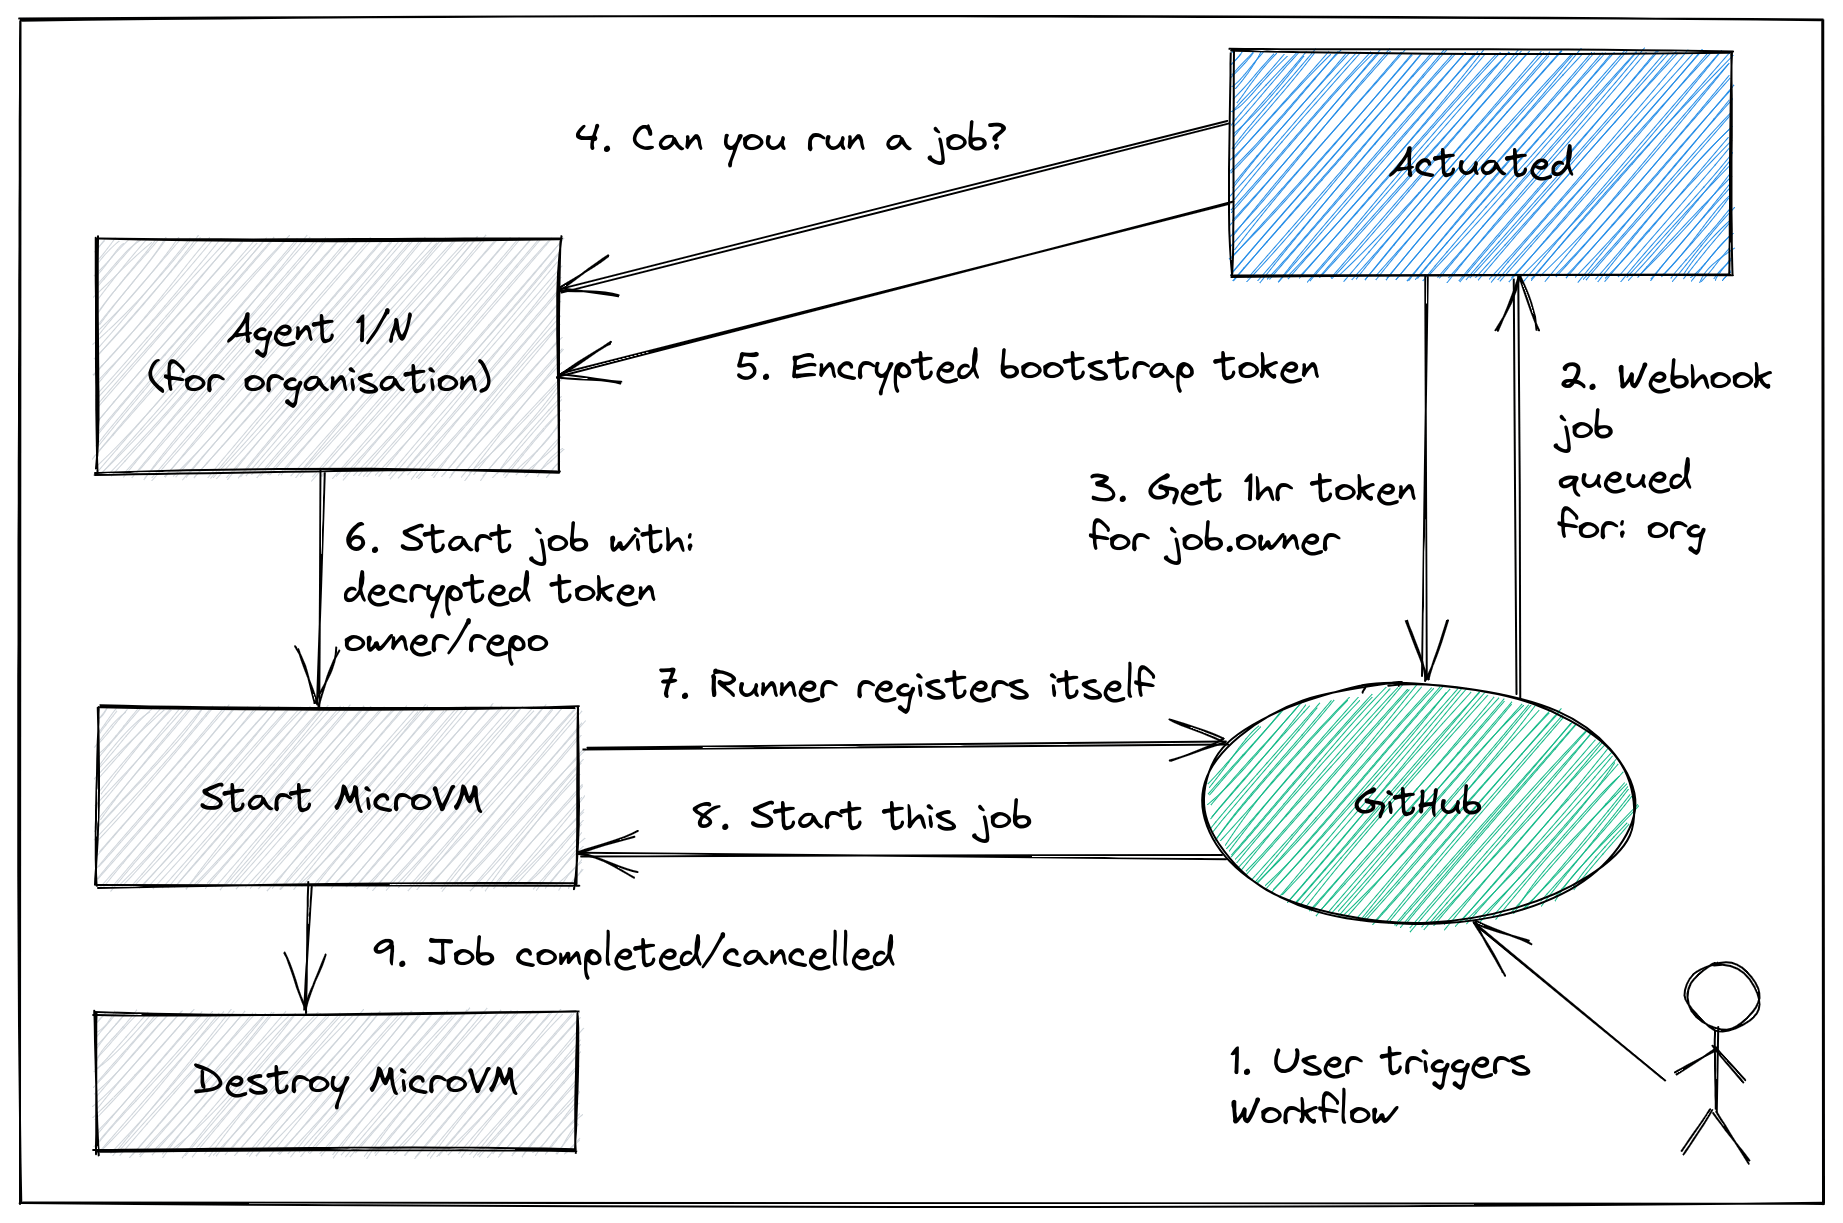 Conceptual flow of starting up a new ephemeral runner